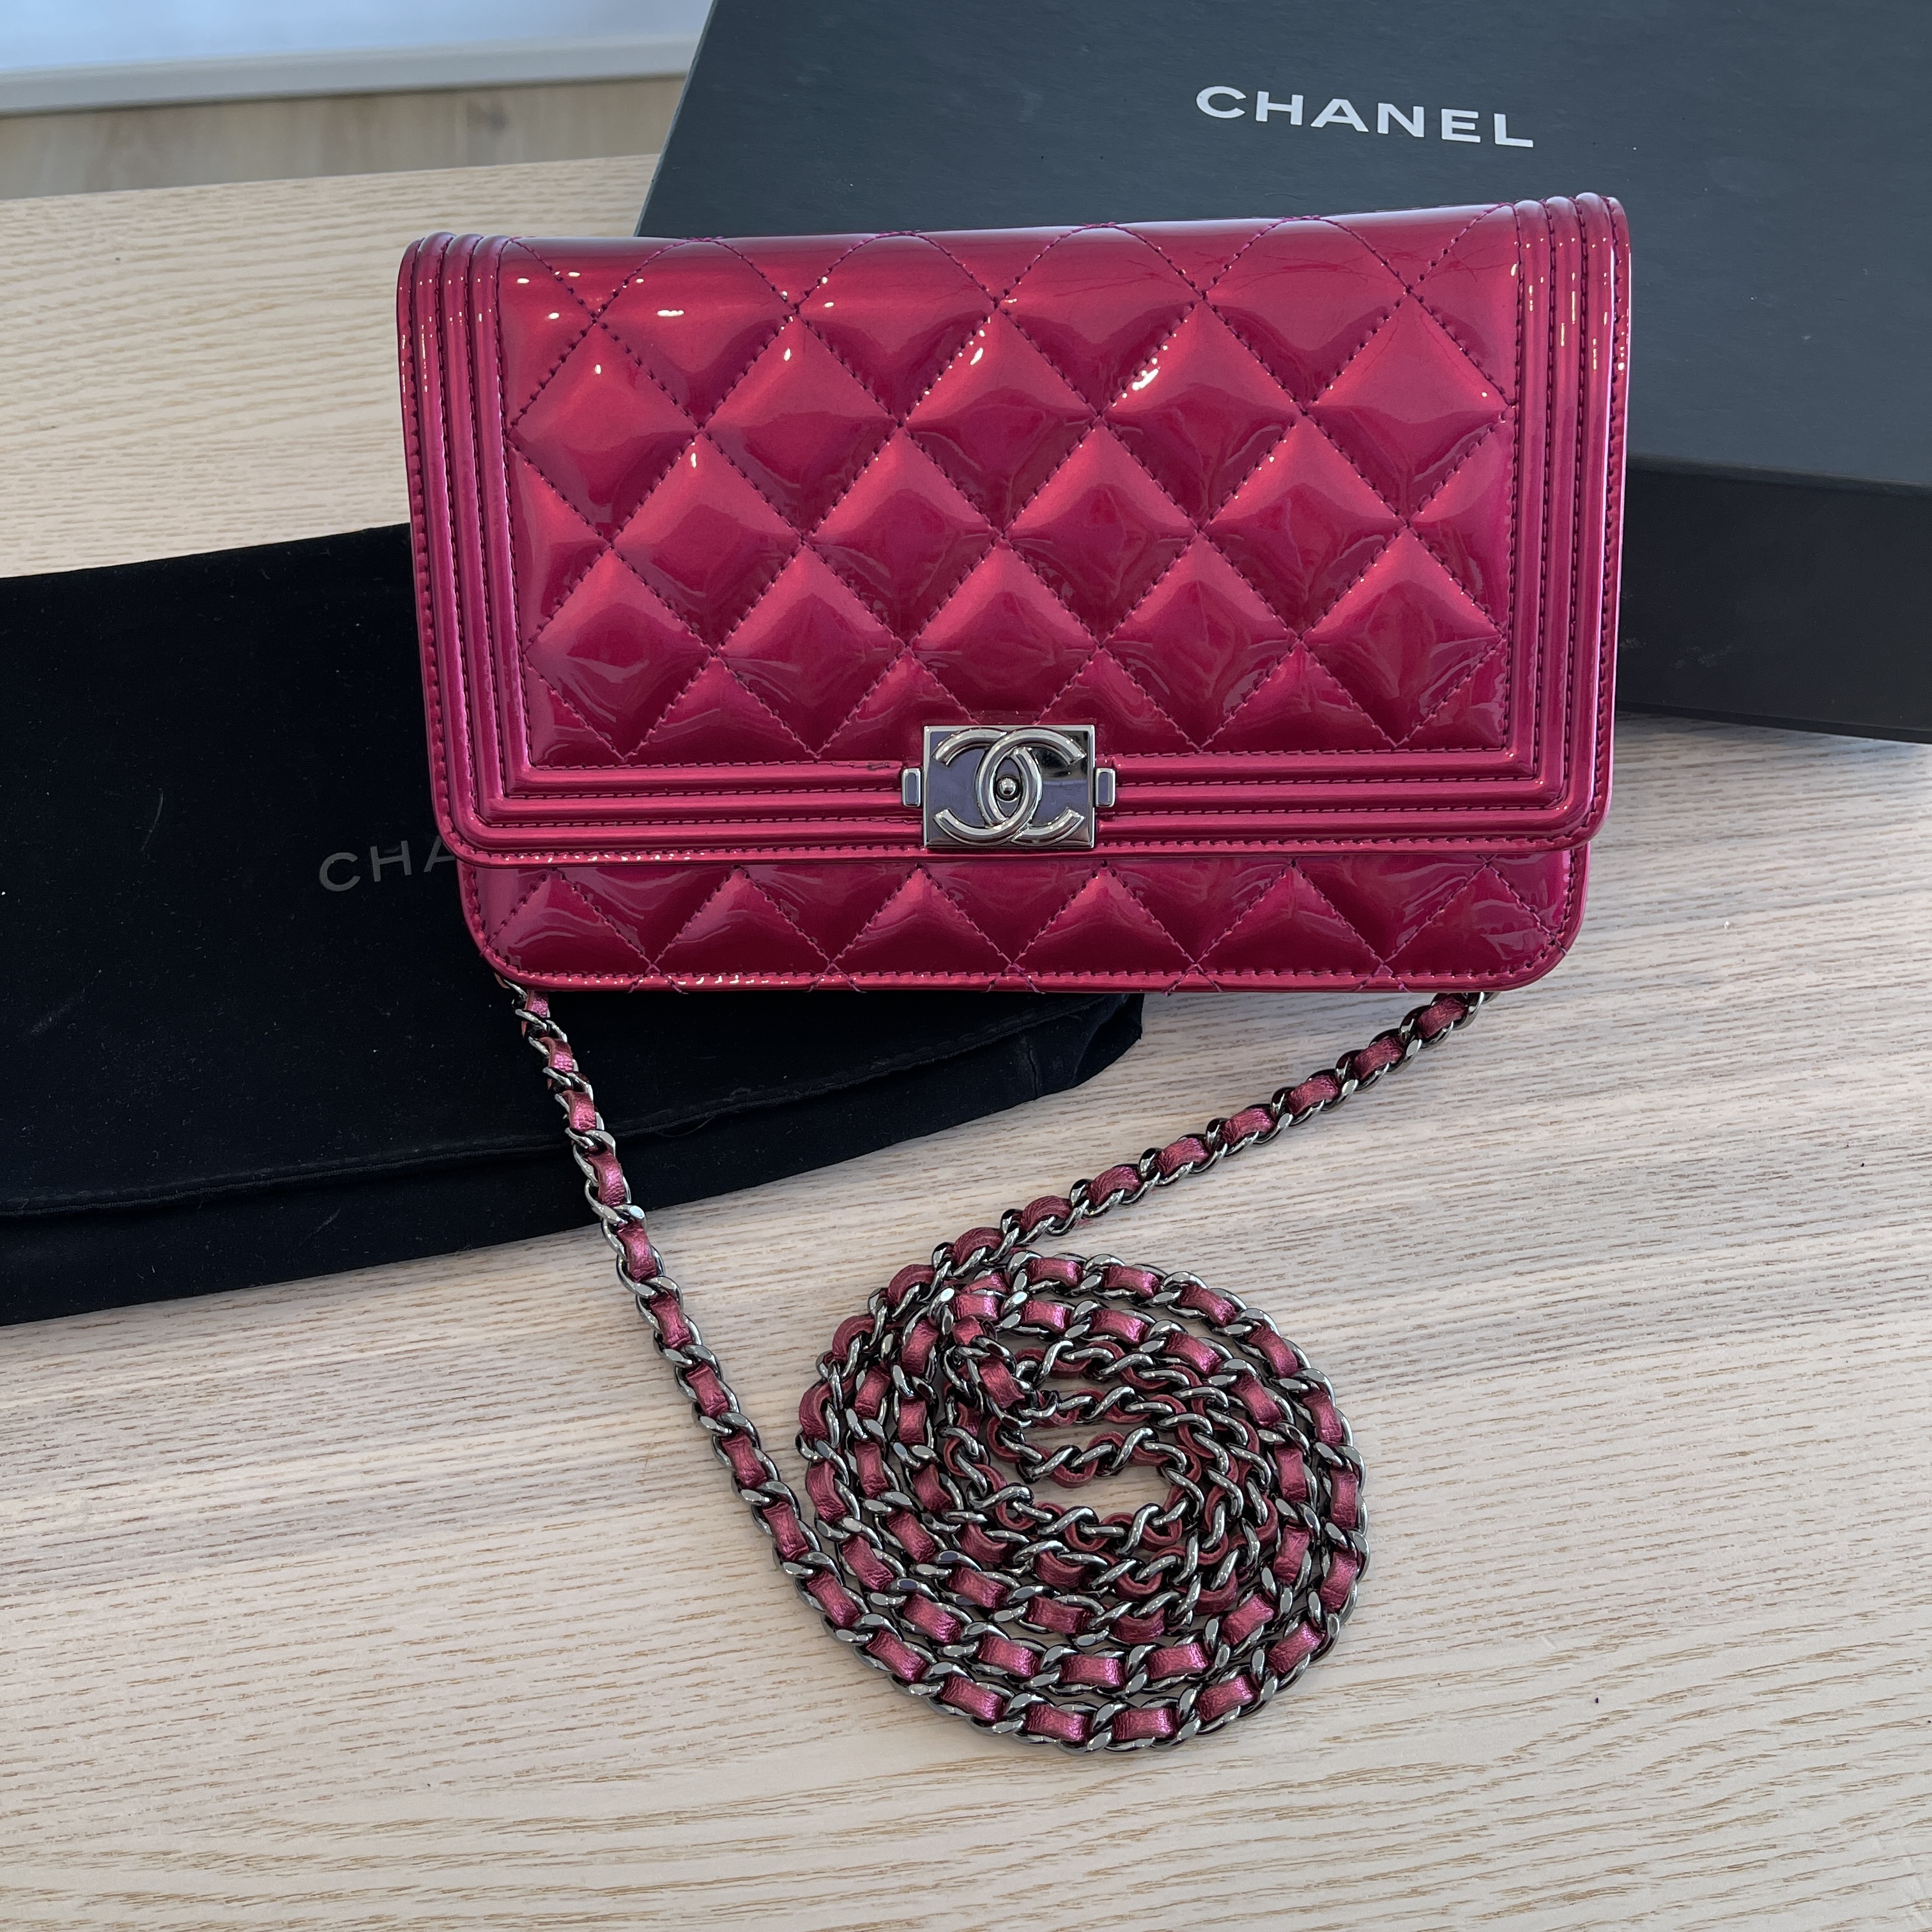 OOTD feat. the Chanel Wallet on Chain (WOC) in light patent pink